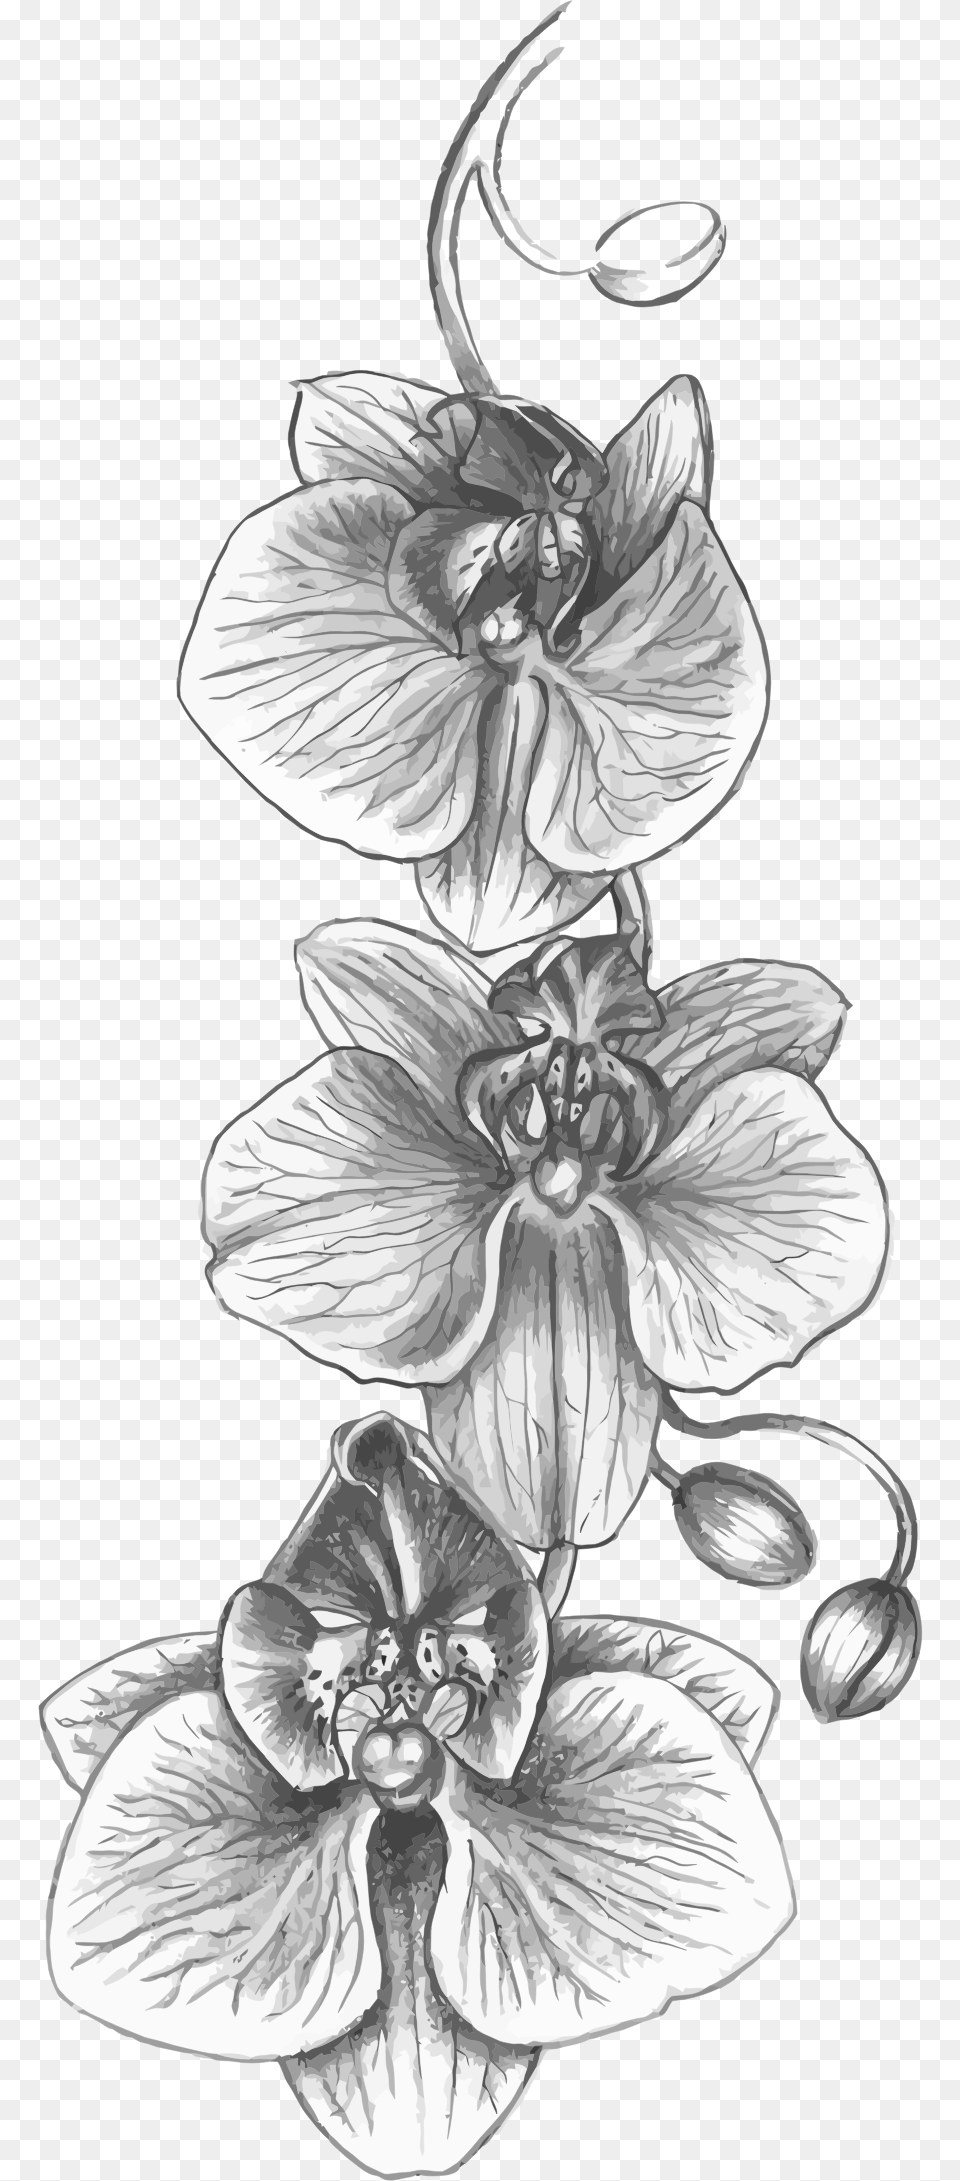 This Icons Design Of Orchid Sketch, Art, Flower, Plant, Drawing Free Transparent Png